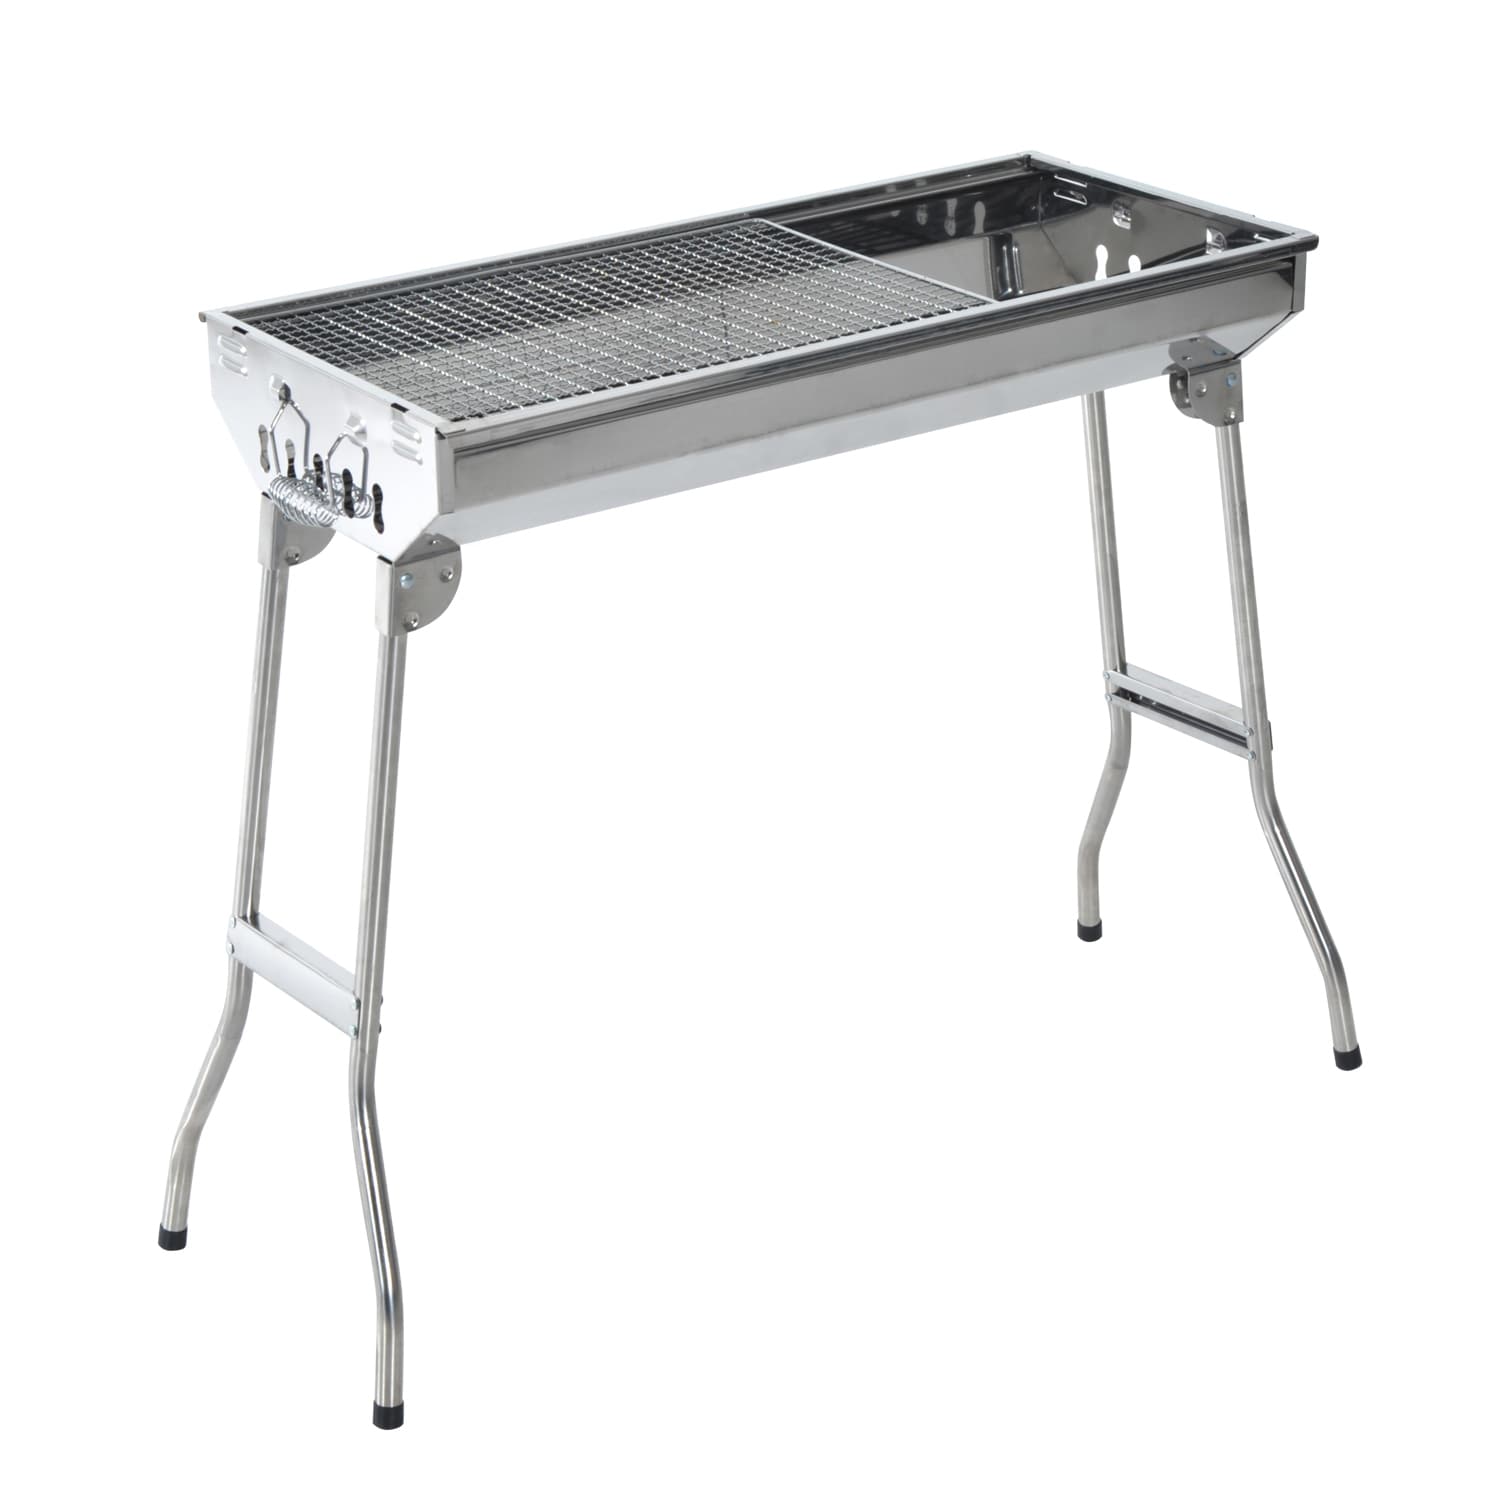  Burch Barrel Flat Packer Outdoor BBQ Charcoal Grill and Wood  Firepit, Our Foldable, Portable and Compact Grill is Made from Stainless  Steel